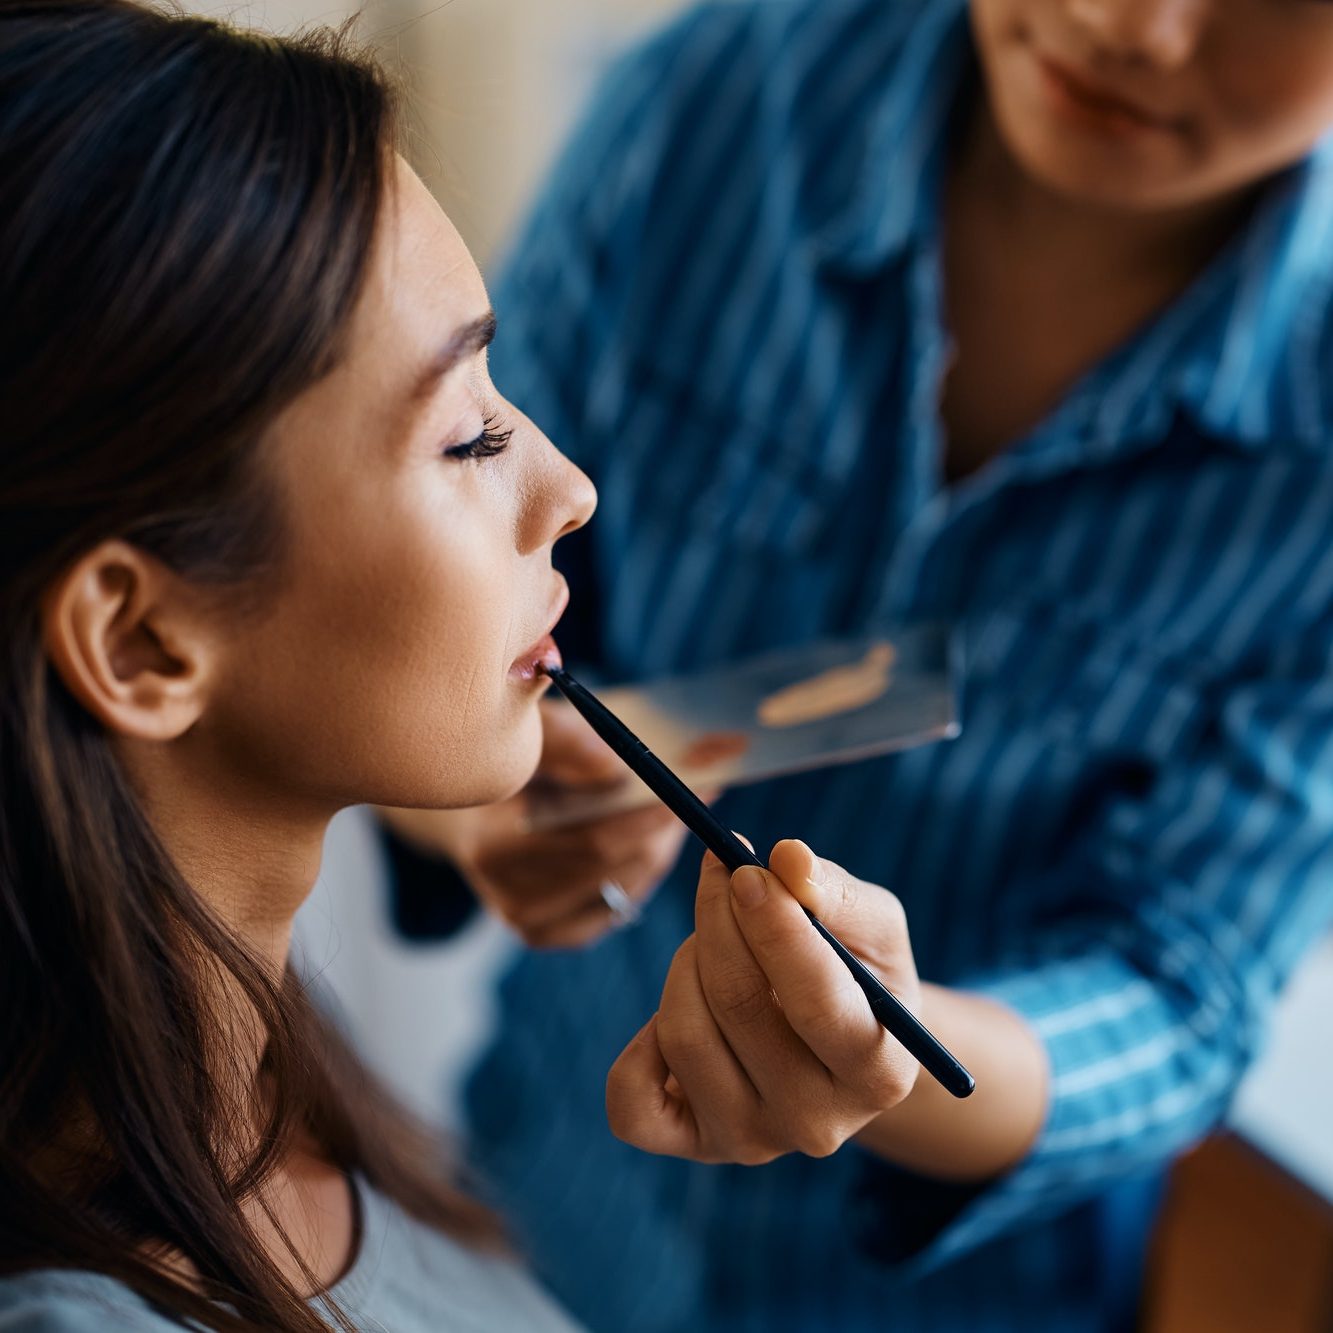 Close up of makeup artist applying lipstick with a brush on woman's lips.